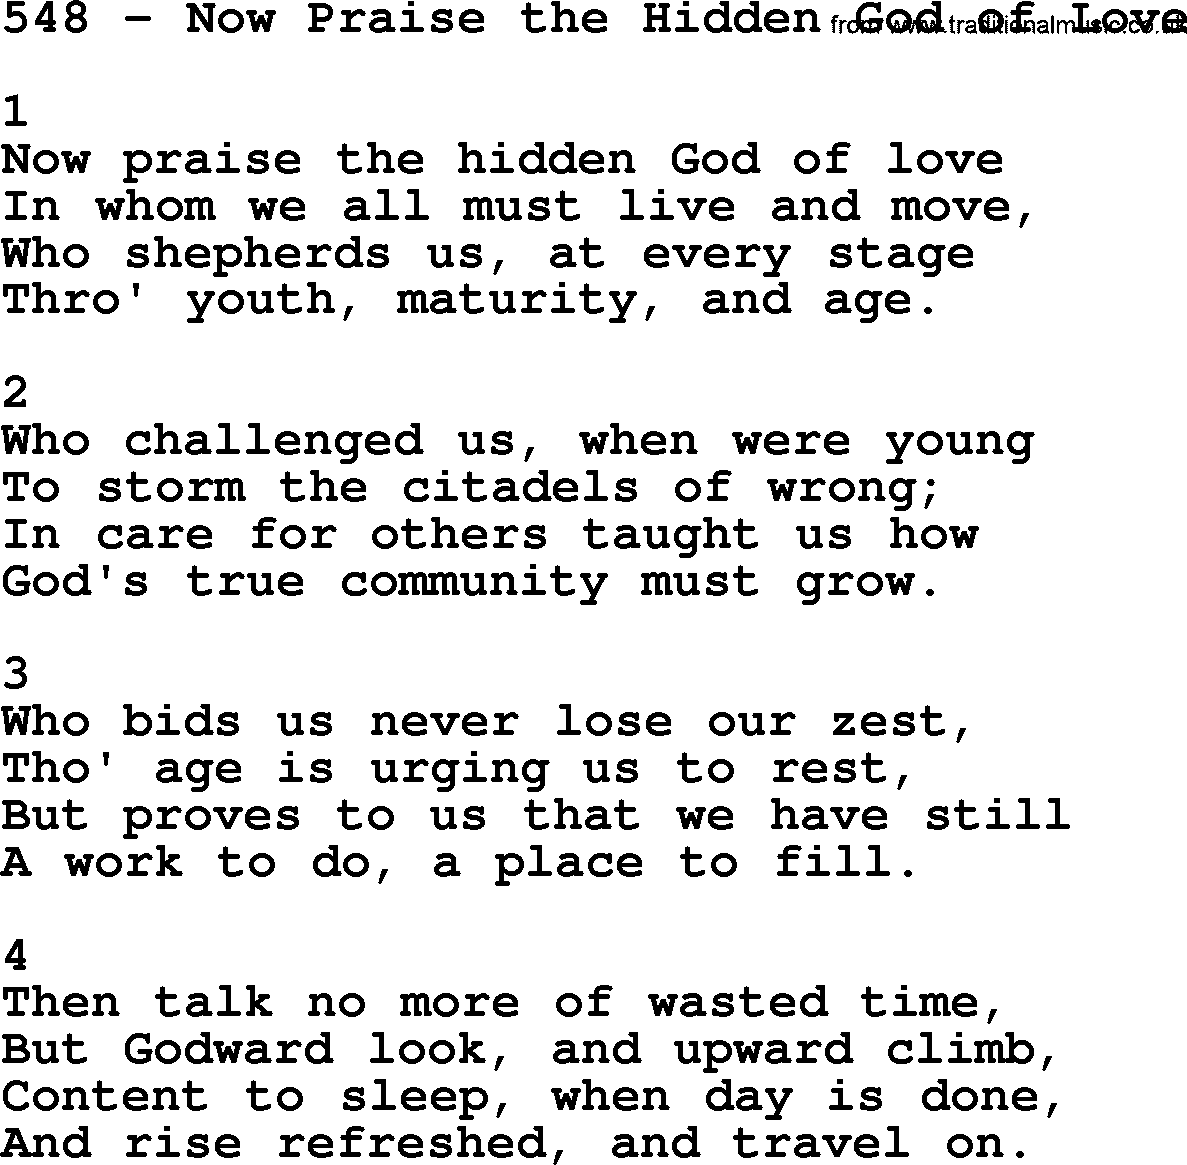 Complete Adventis Hymnal, title: 548-Now Praise The Hidden God Of Love, with lyrics, midi, mp3, powerpoints(PPT) and PDF,